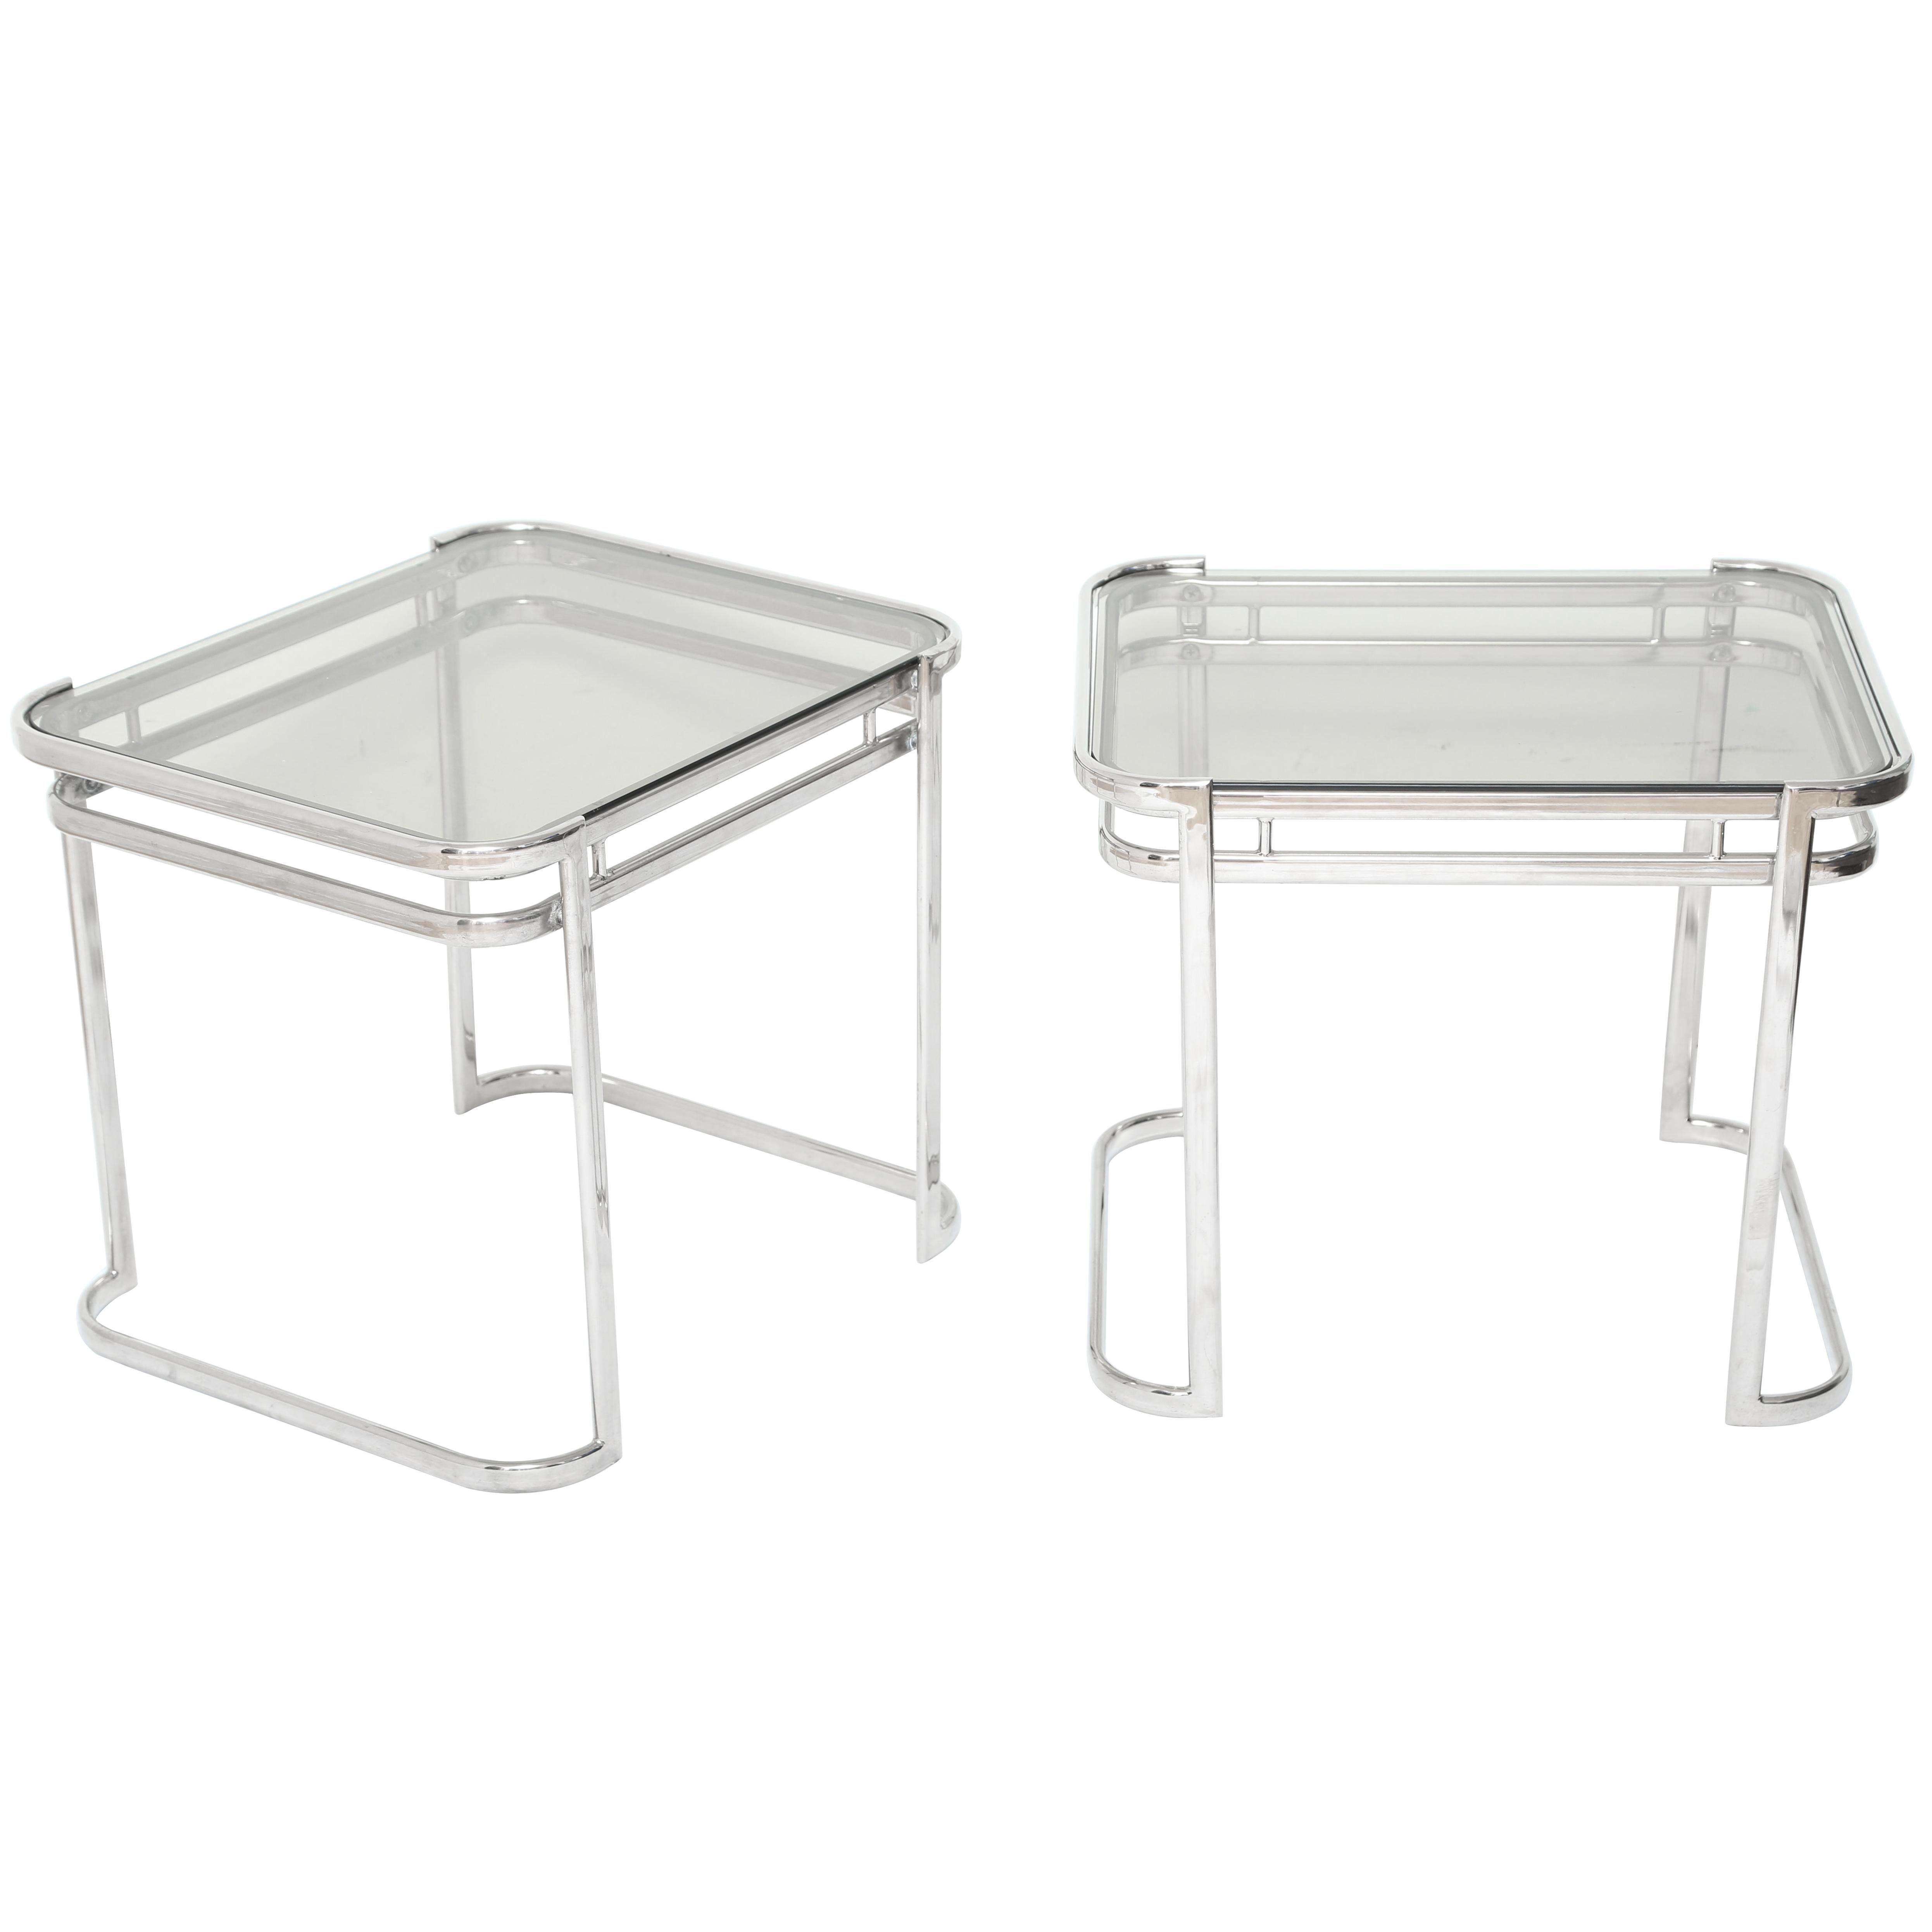 Pair of Mid-Century Modern end tables in polished chrome with smoked grey glass tops. Tables have streamline design with double banded frames and curved tops and curved bases. The tables have a small rectangular form and be used horizontally or